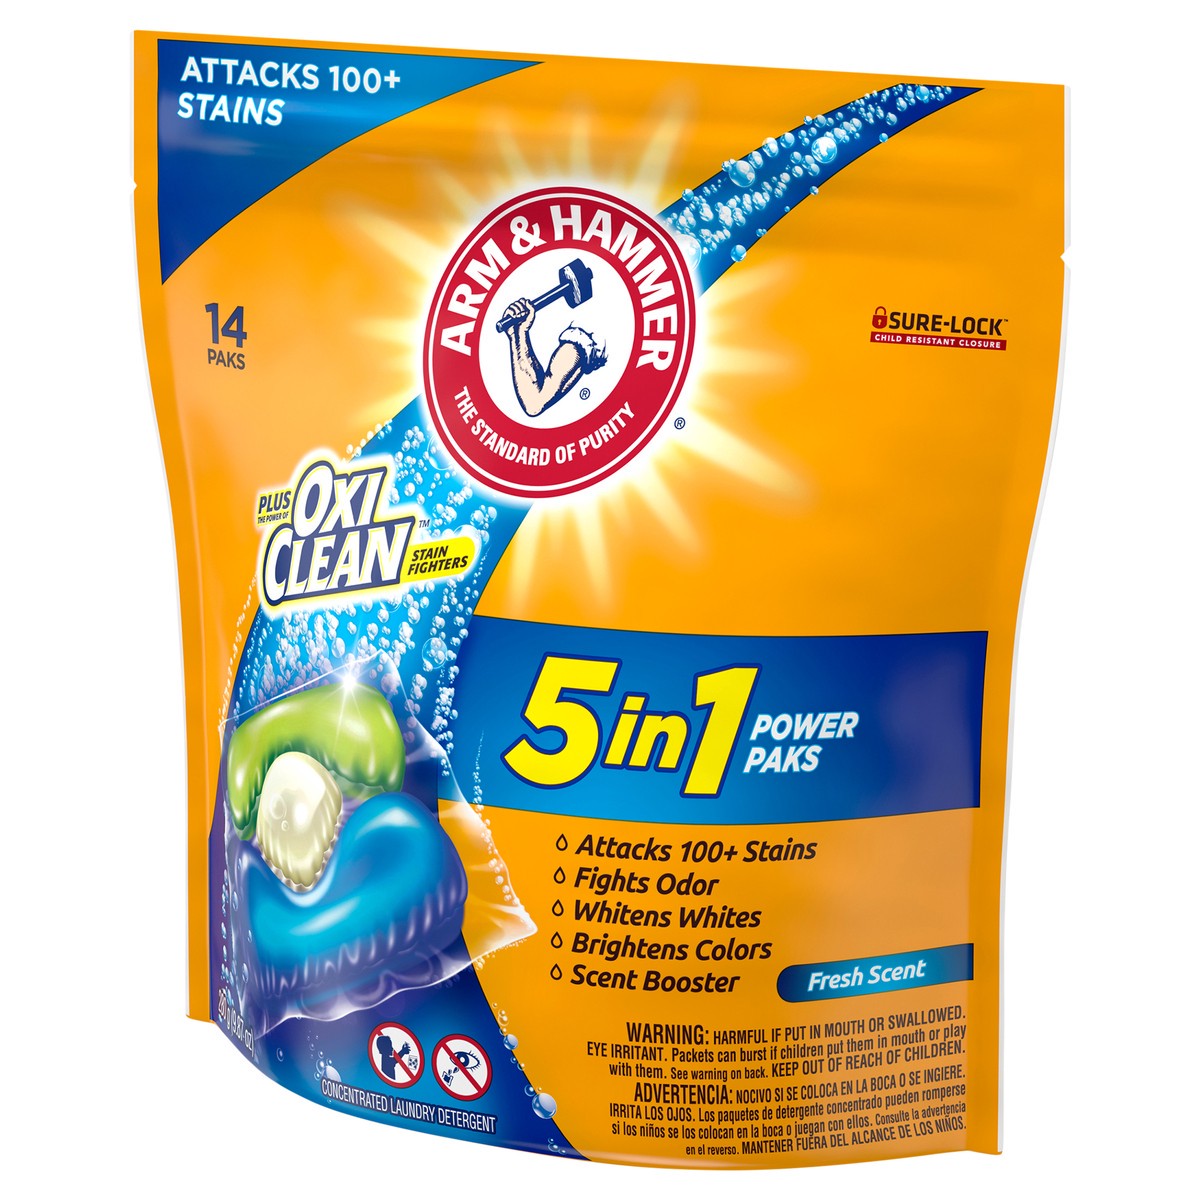 slide 8 of 8, ARM & HAMMER plus OxiClean 5-in-1 Power Paks, 14 Count, 9.87 oz